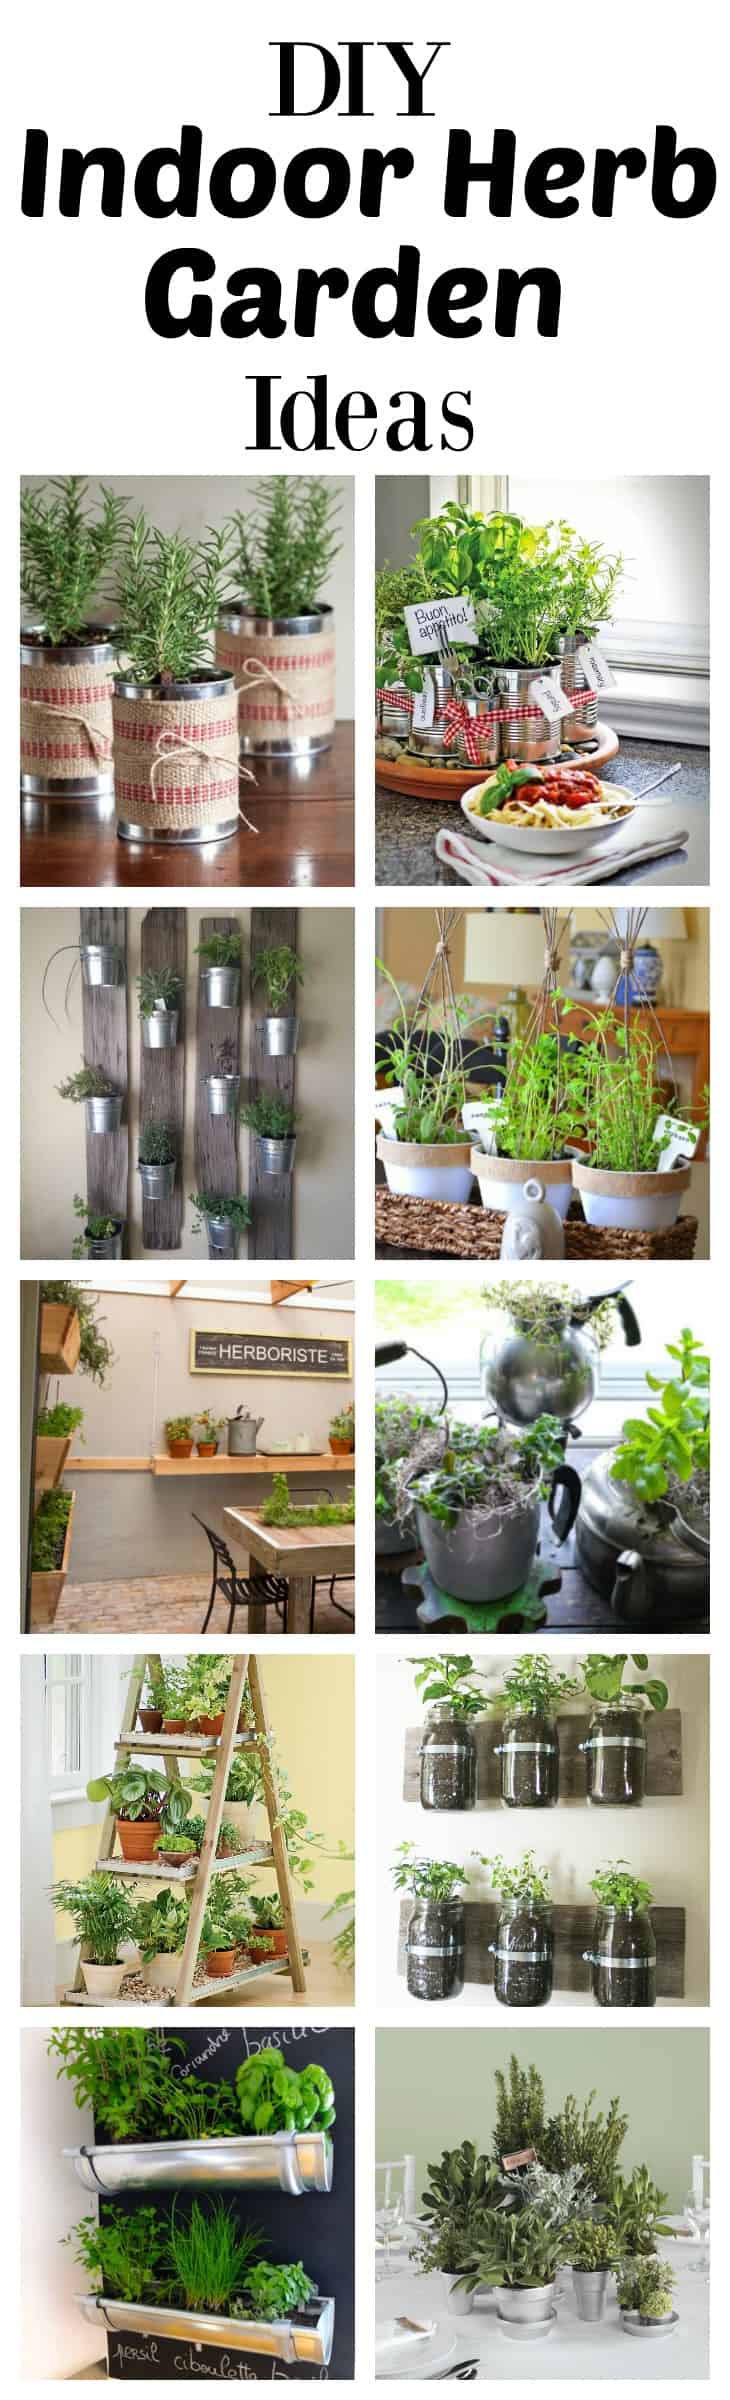 What could be more convenient than being able to clip herbs to cook with right in your own kitchen? Check out these inspiring DIY indoor herb garden ideas that would be so easy to diy yourself!